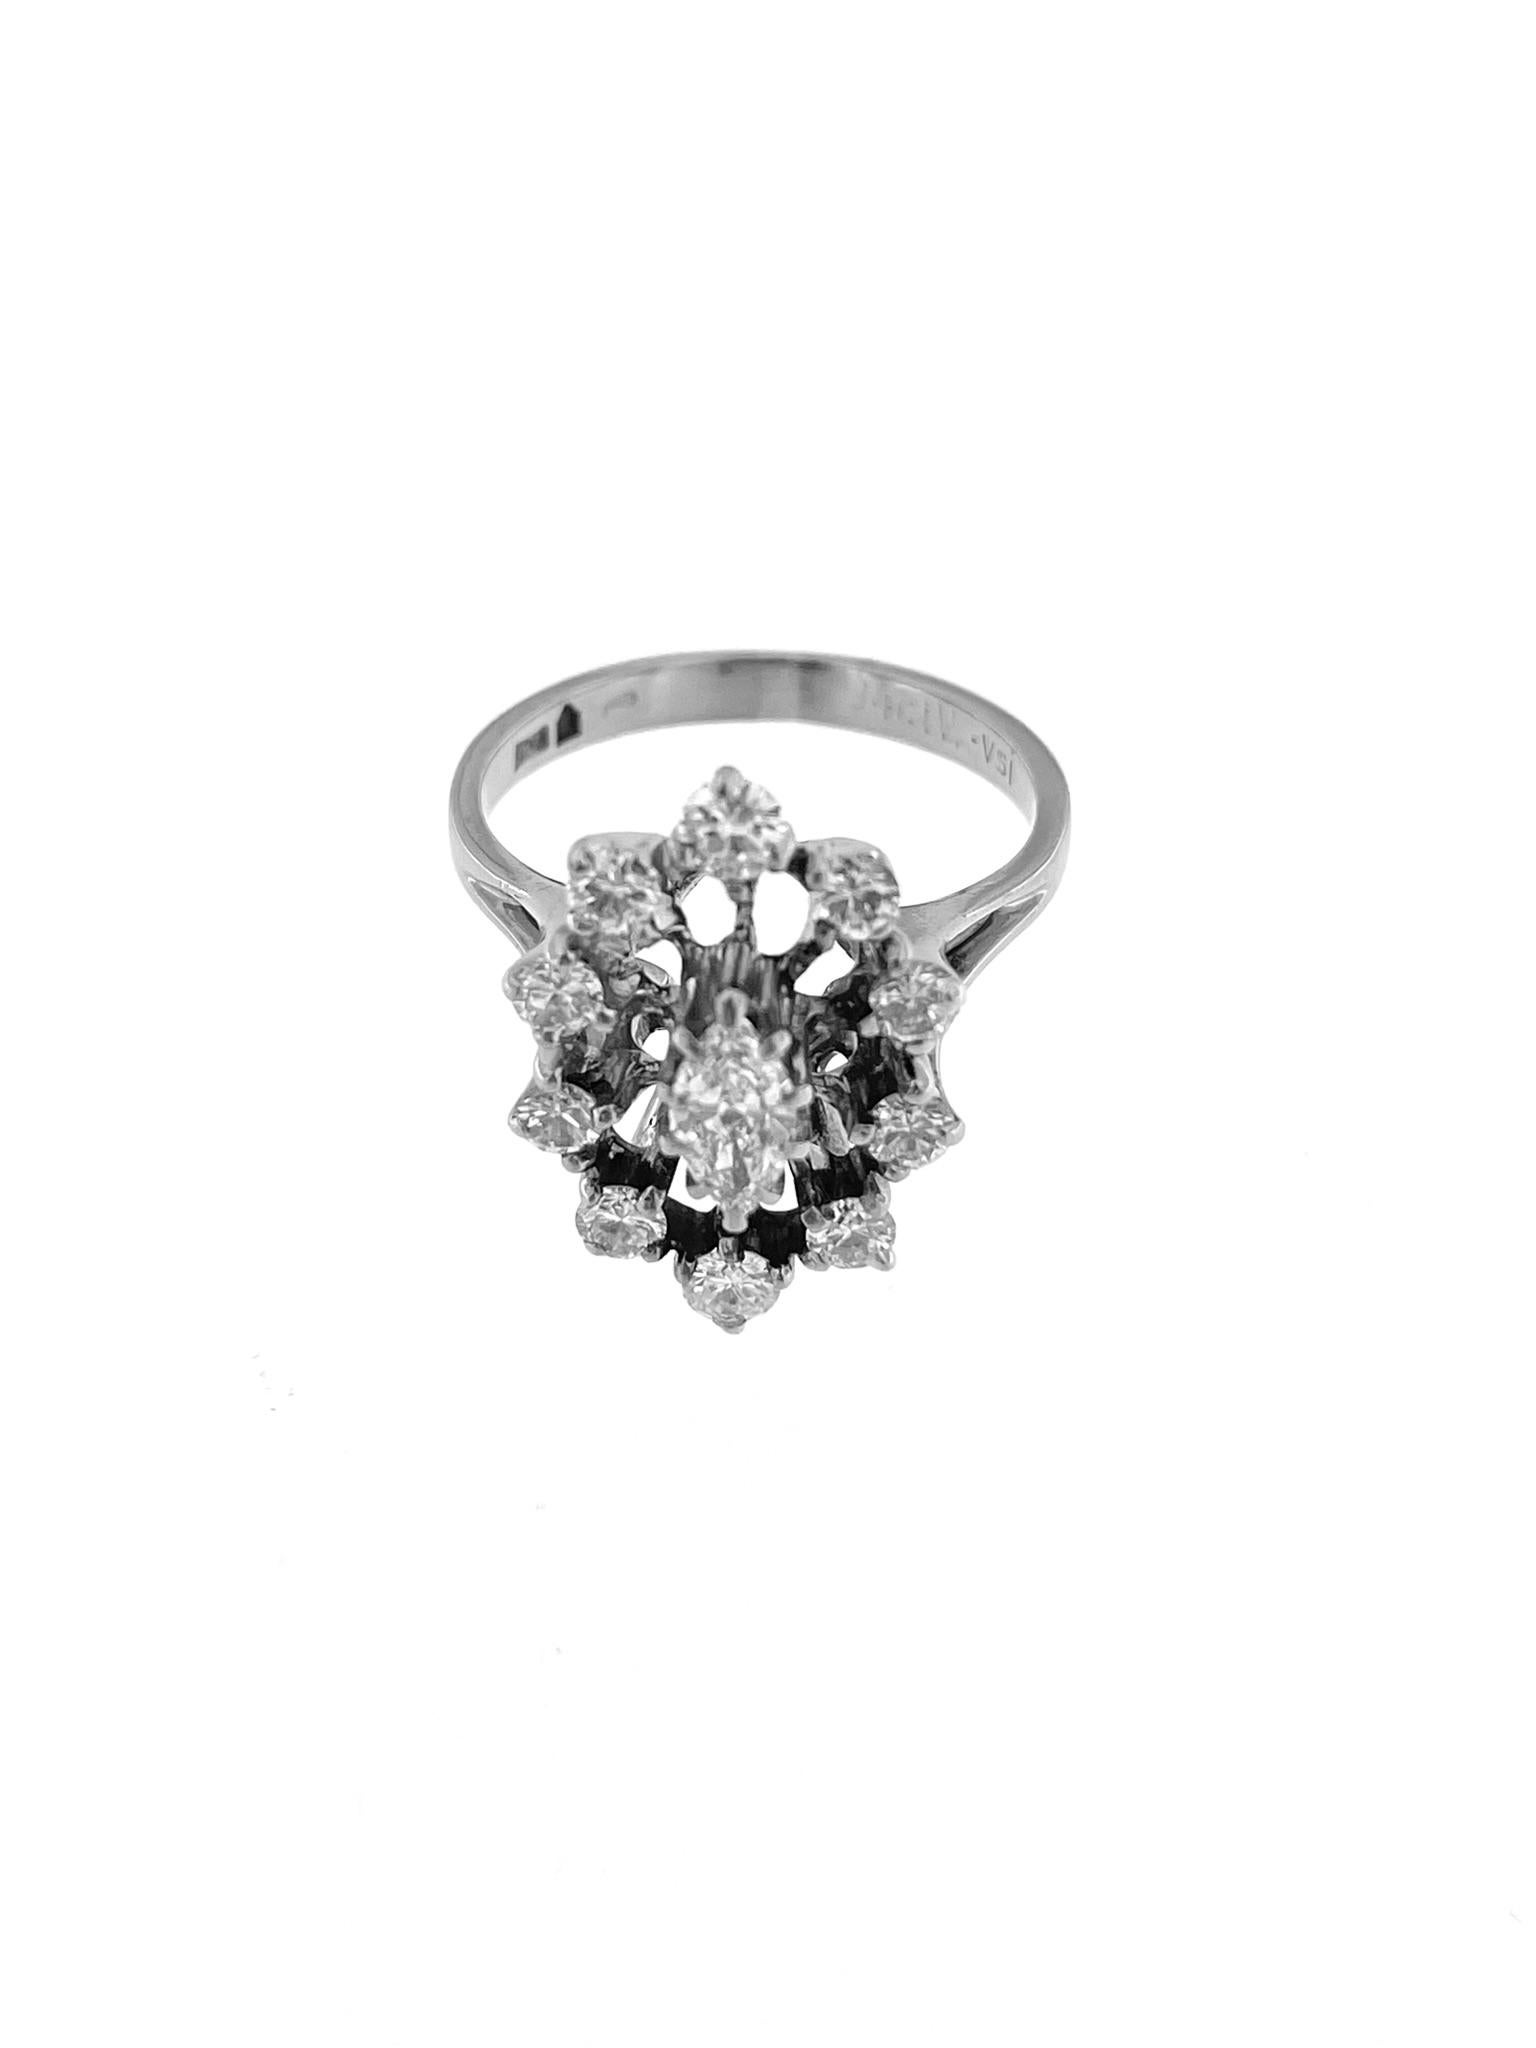 The HRD Certified White Gold Art Deco Cocktail Ring is an exquisite piece of jewelry crafted with precision and sophistication. Made from high-quality 18kt white gold, this ring showcases a stunning marquise cut central stone weighing 0.40 carats.